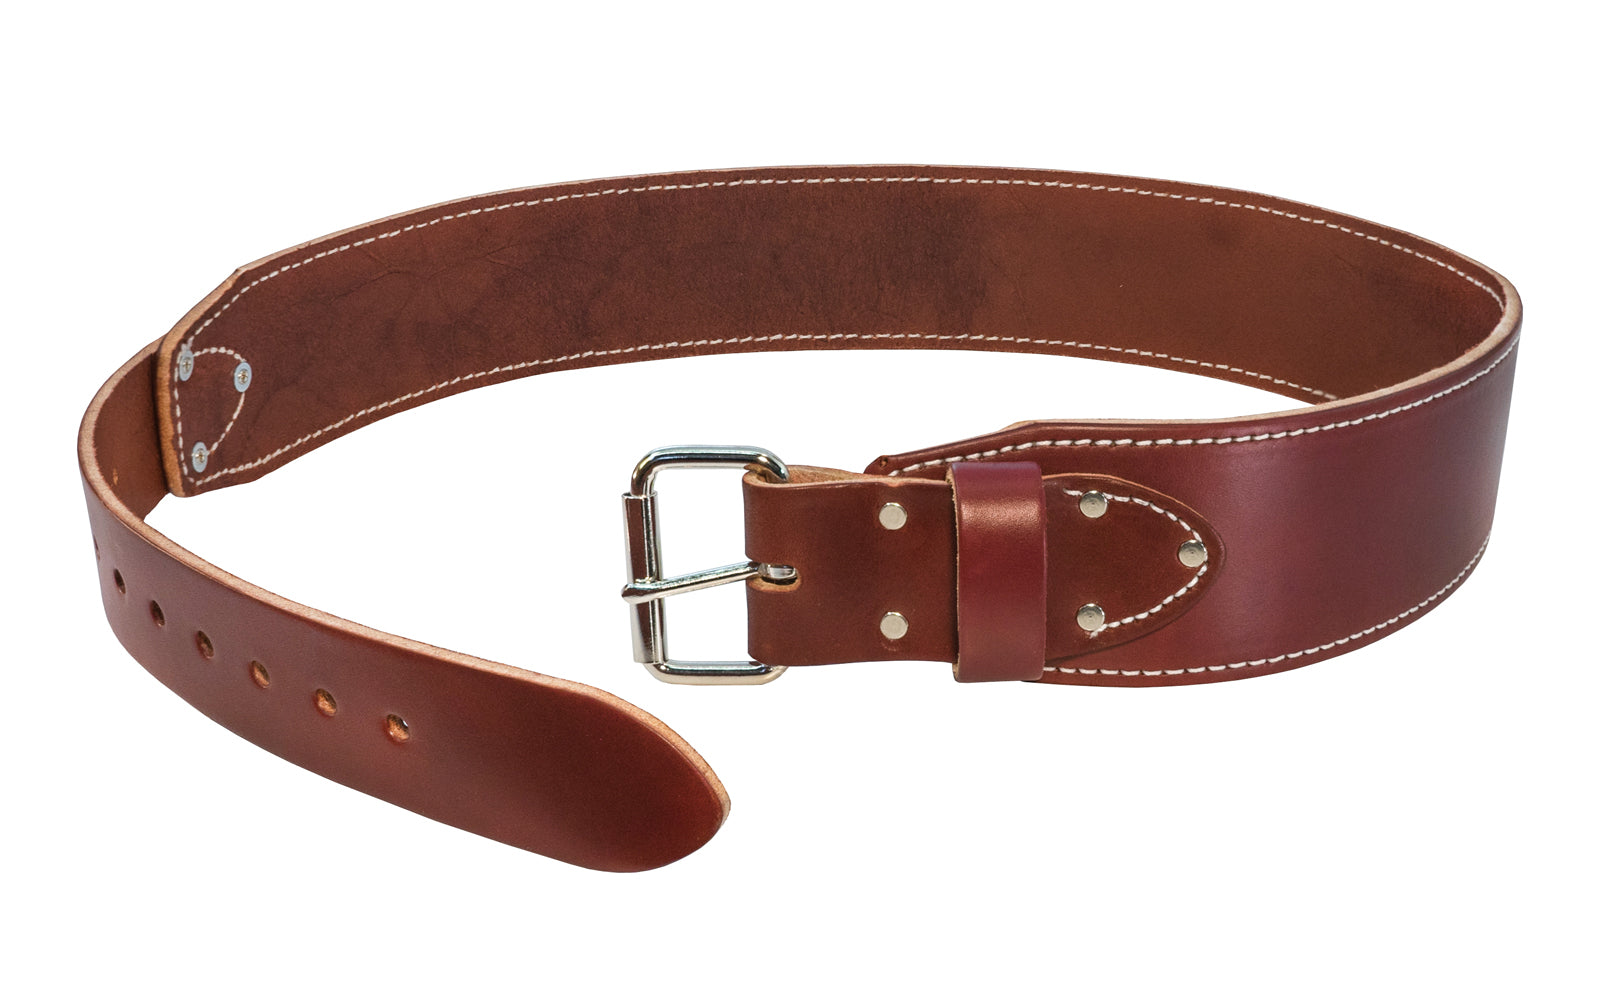 Occidental Leather Extra Large HD Ranger Work Belt ~ Model 5035XL - Made of genuine leather - Made in USA  - 759244084900 - XL Occidental Belt - Leather Work Belt - 3